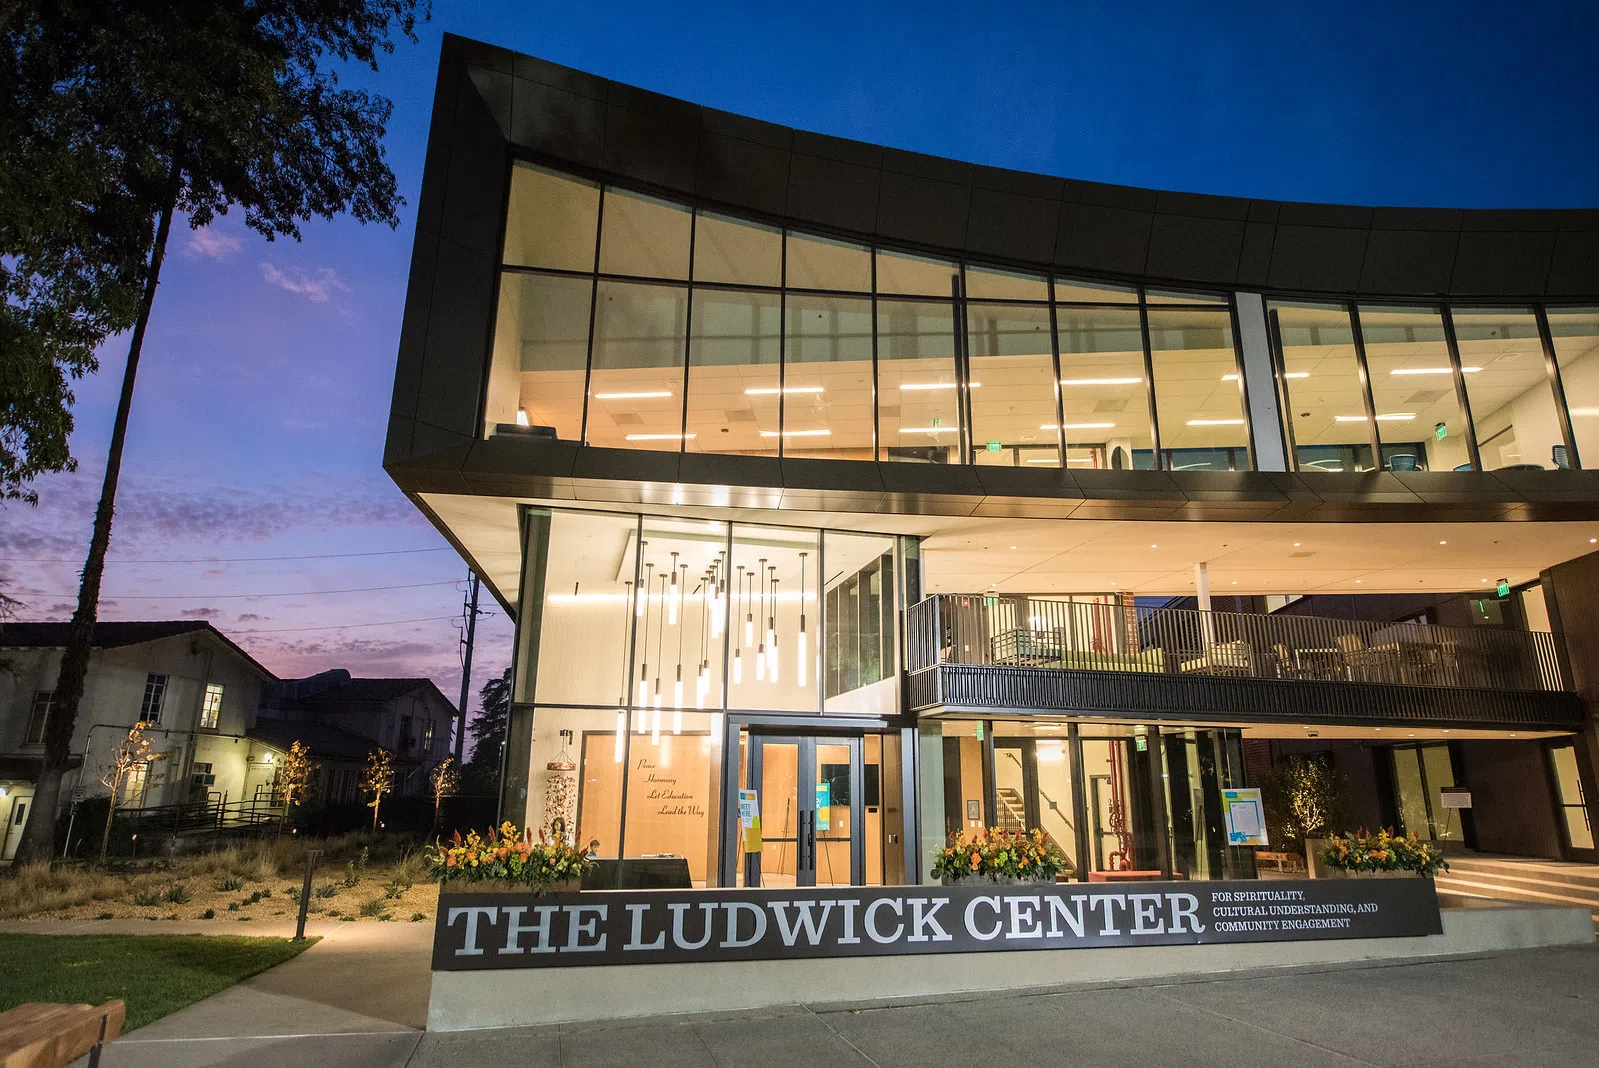 The Ludwick Center for Spirituality, Cultural Understanding, and Community Engagement is the new heart of the university community, an interfaith gathering place for La Verne students, faculty, and friends to reflect, meditate, and engage in dialogue. 